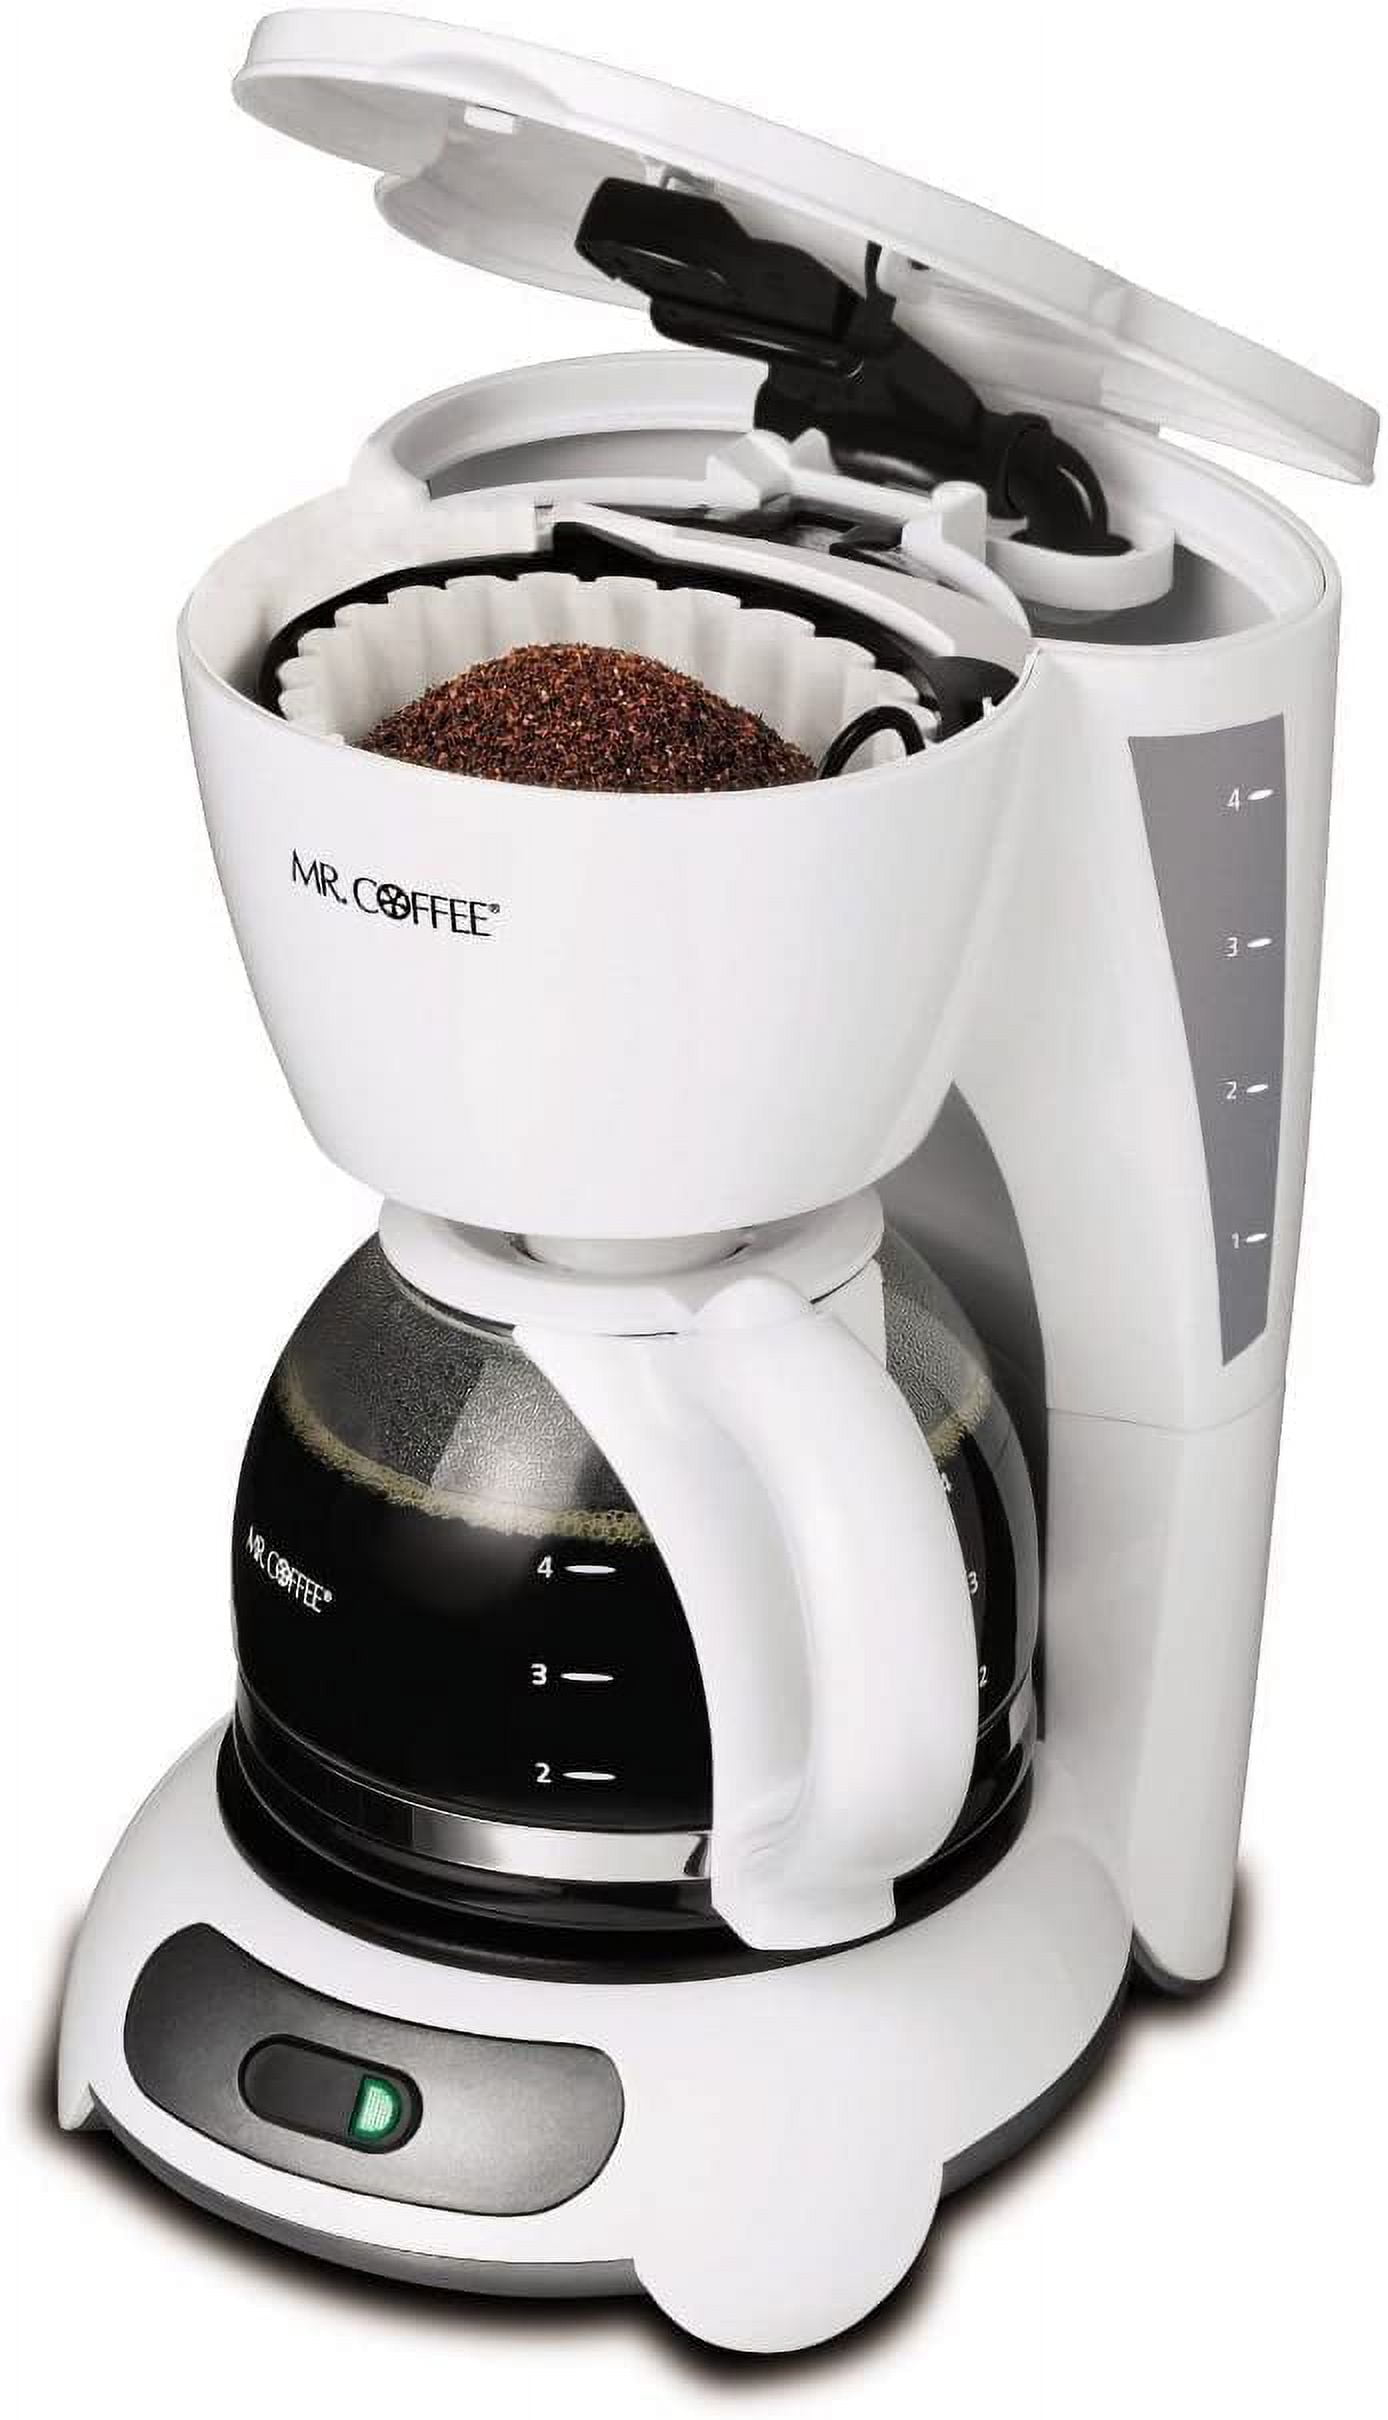 The best back-to-school tech package - Mr. Coffee CGX5 4-Cup